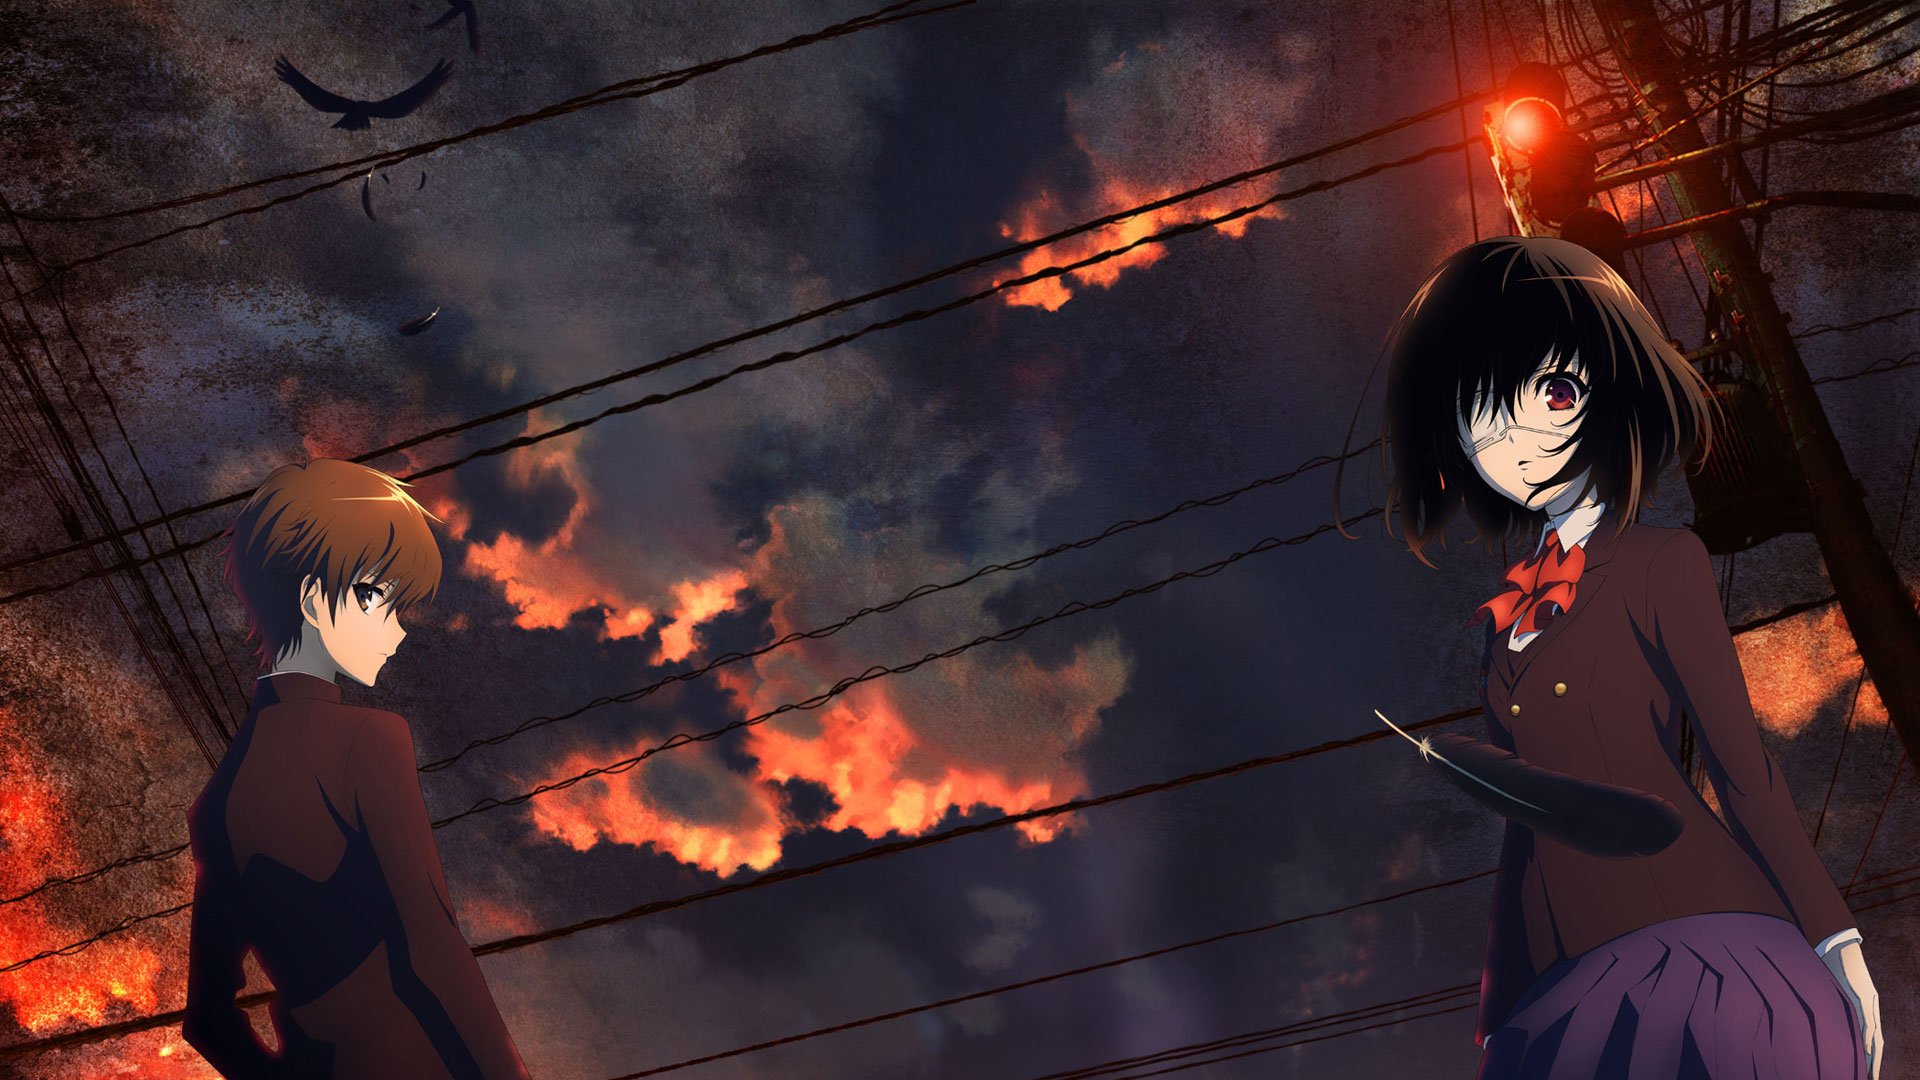 Another Anime Television Series Best HD Wallpaper 